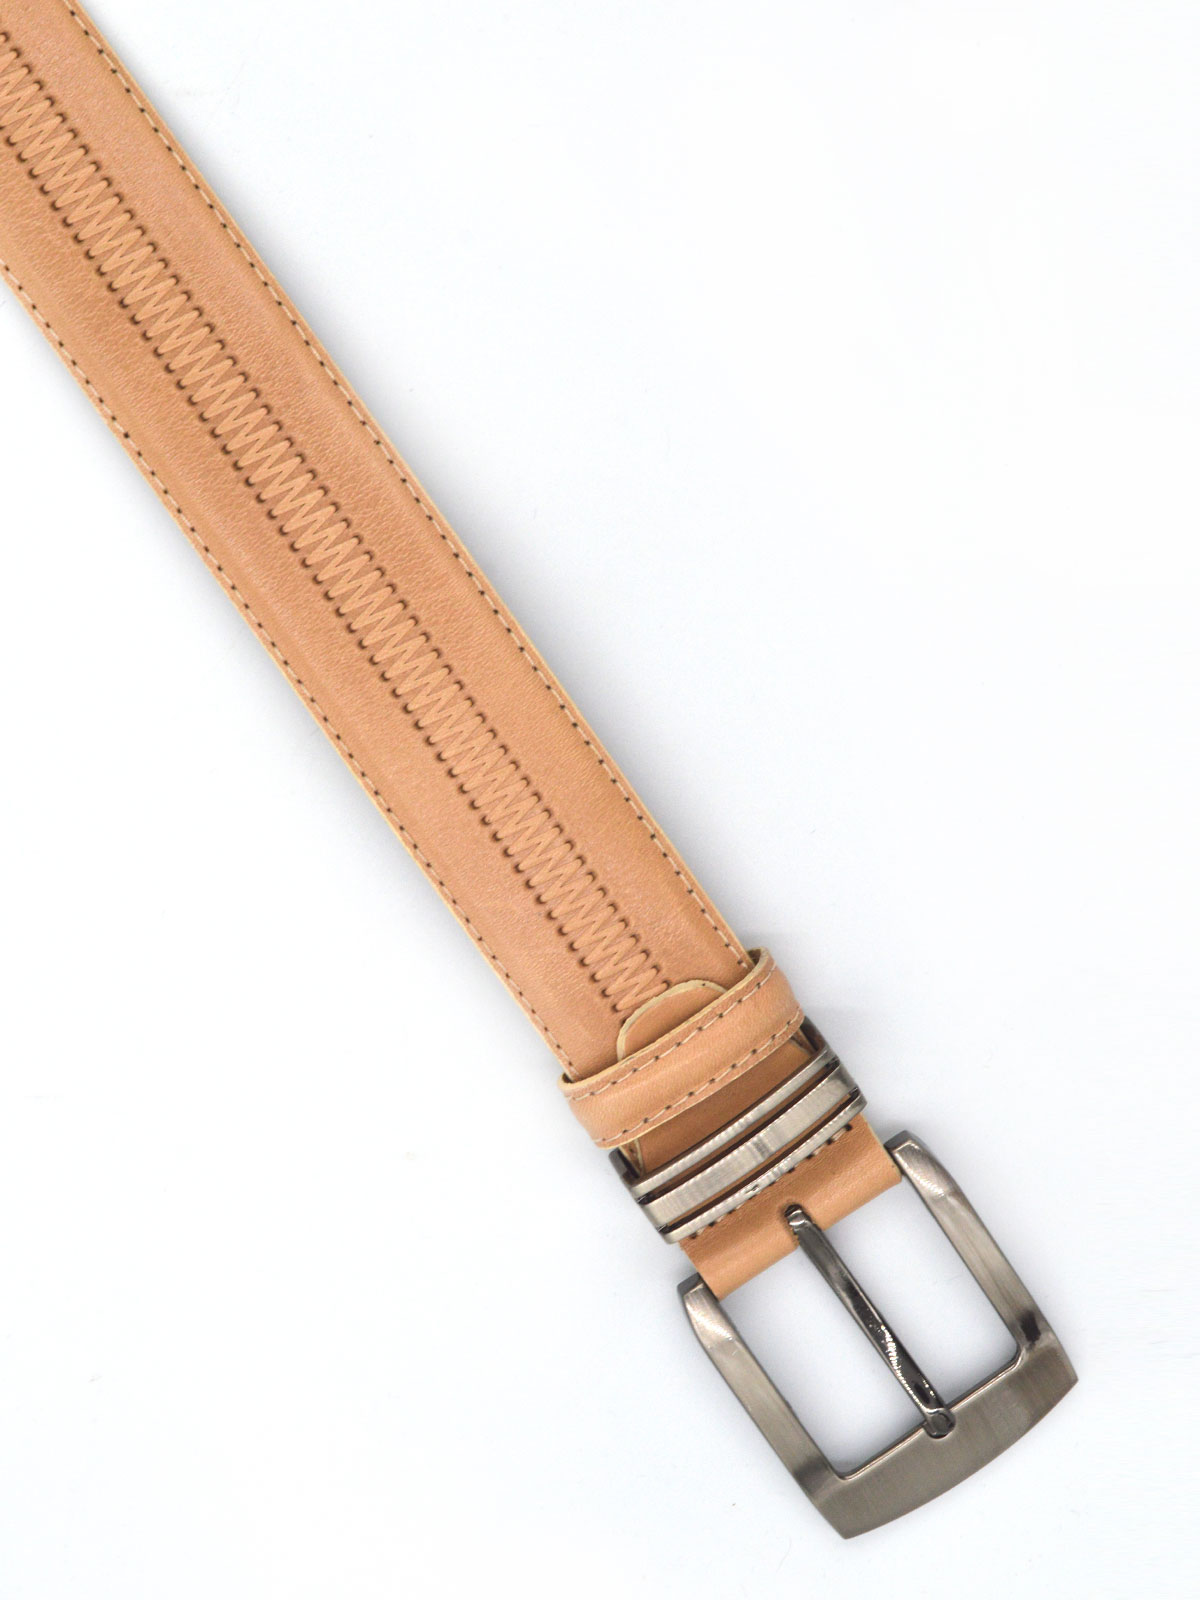 Mens belt in beige with a buckle - 10454 - € 24.75 img3